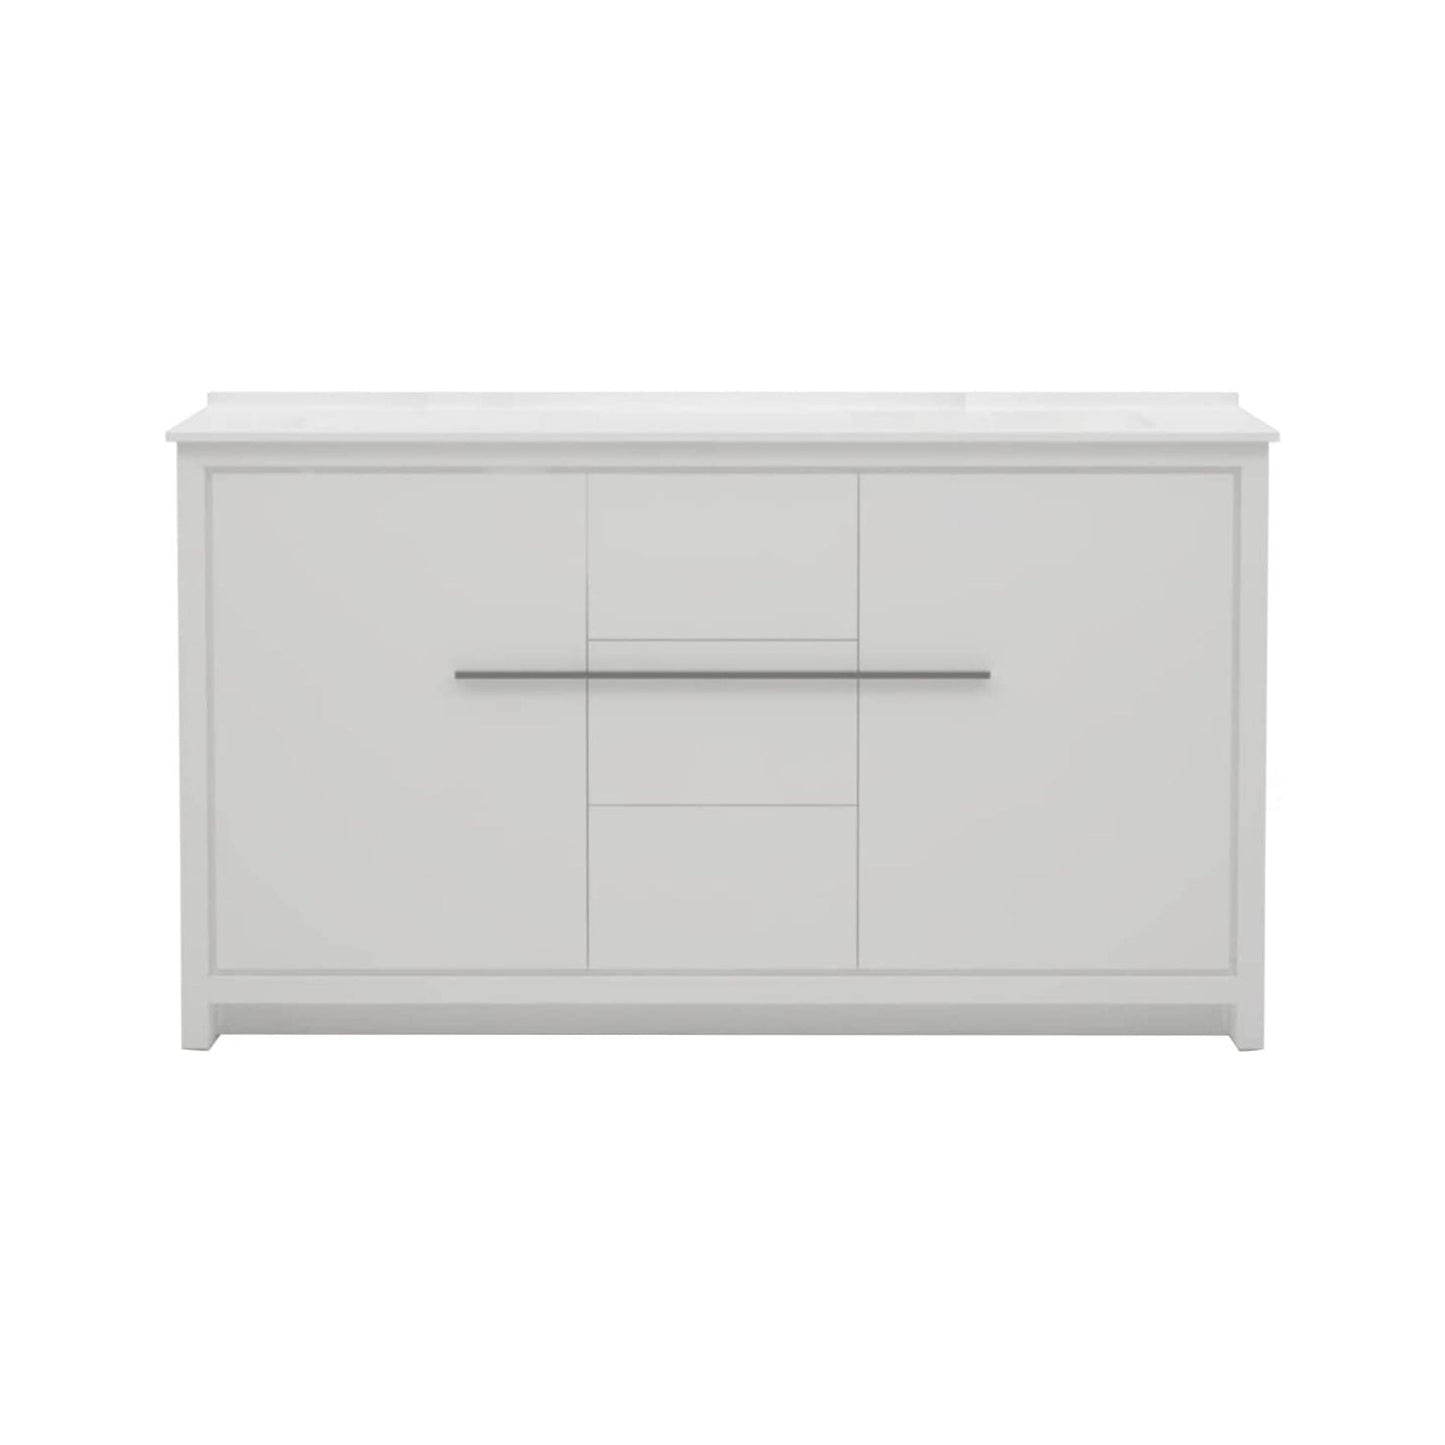 Casa Mare Alessio 60" Glossy White Bathroom Vanity and Acrylic Double Sink Combo